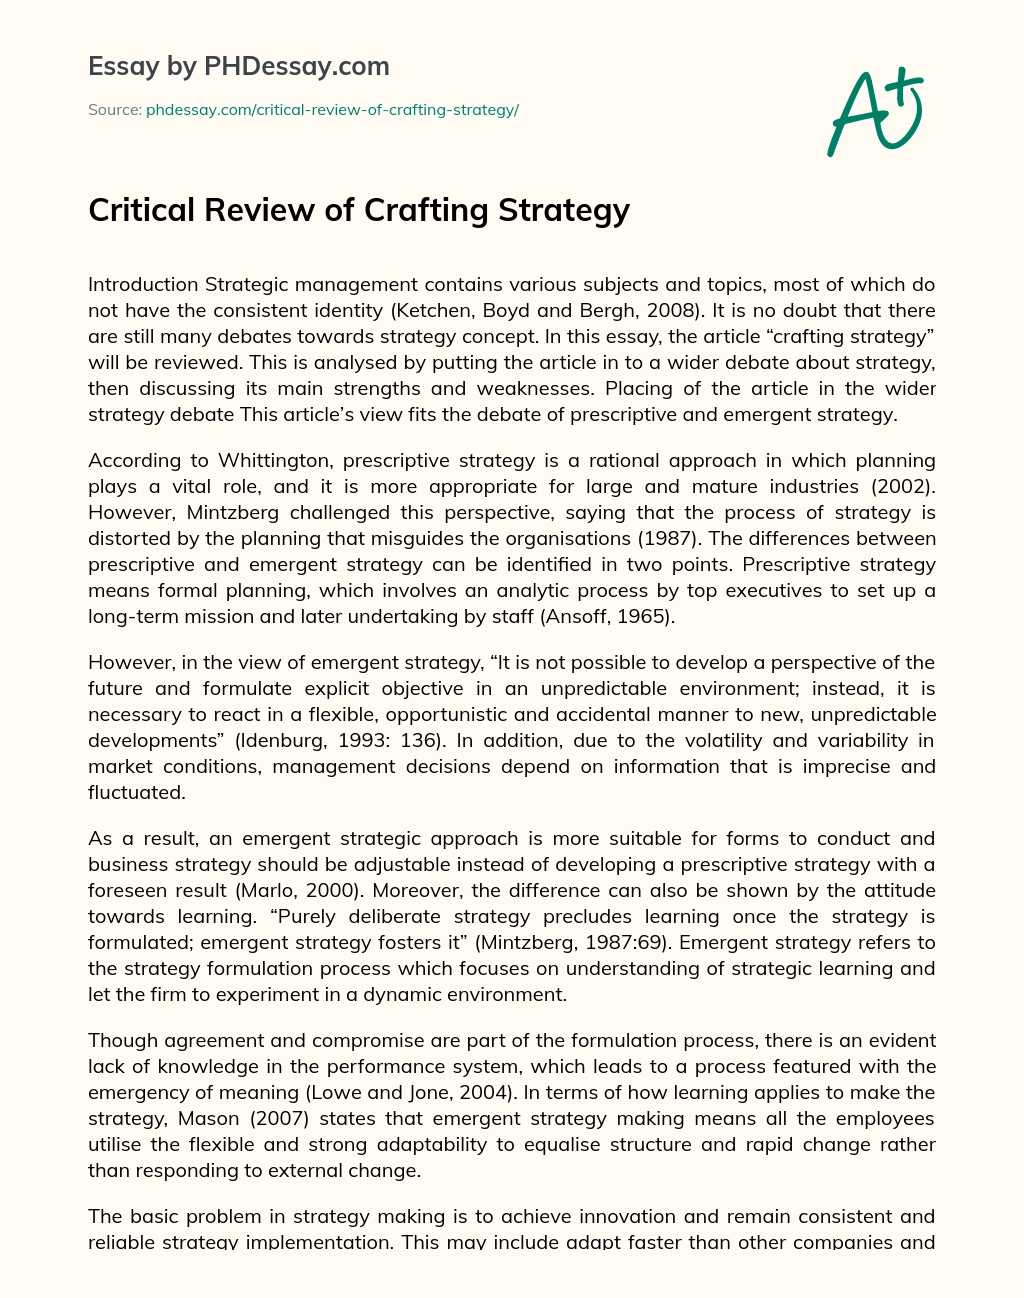 Critical Review of Crafting Strategy essay